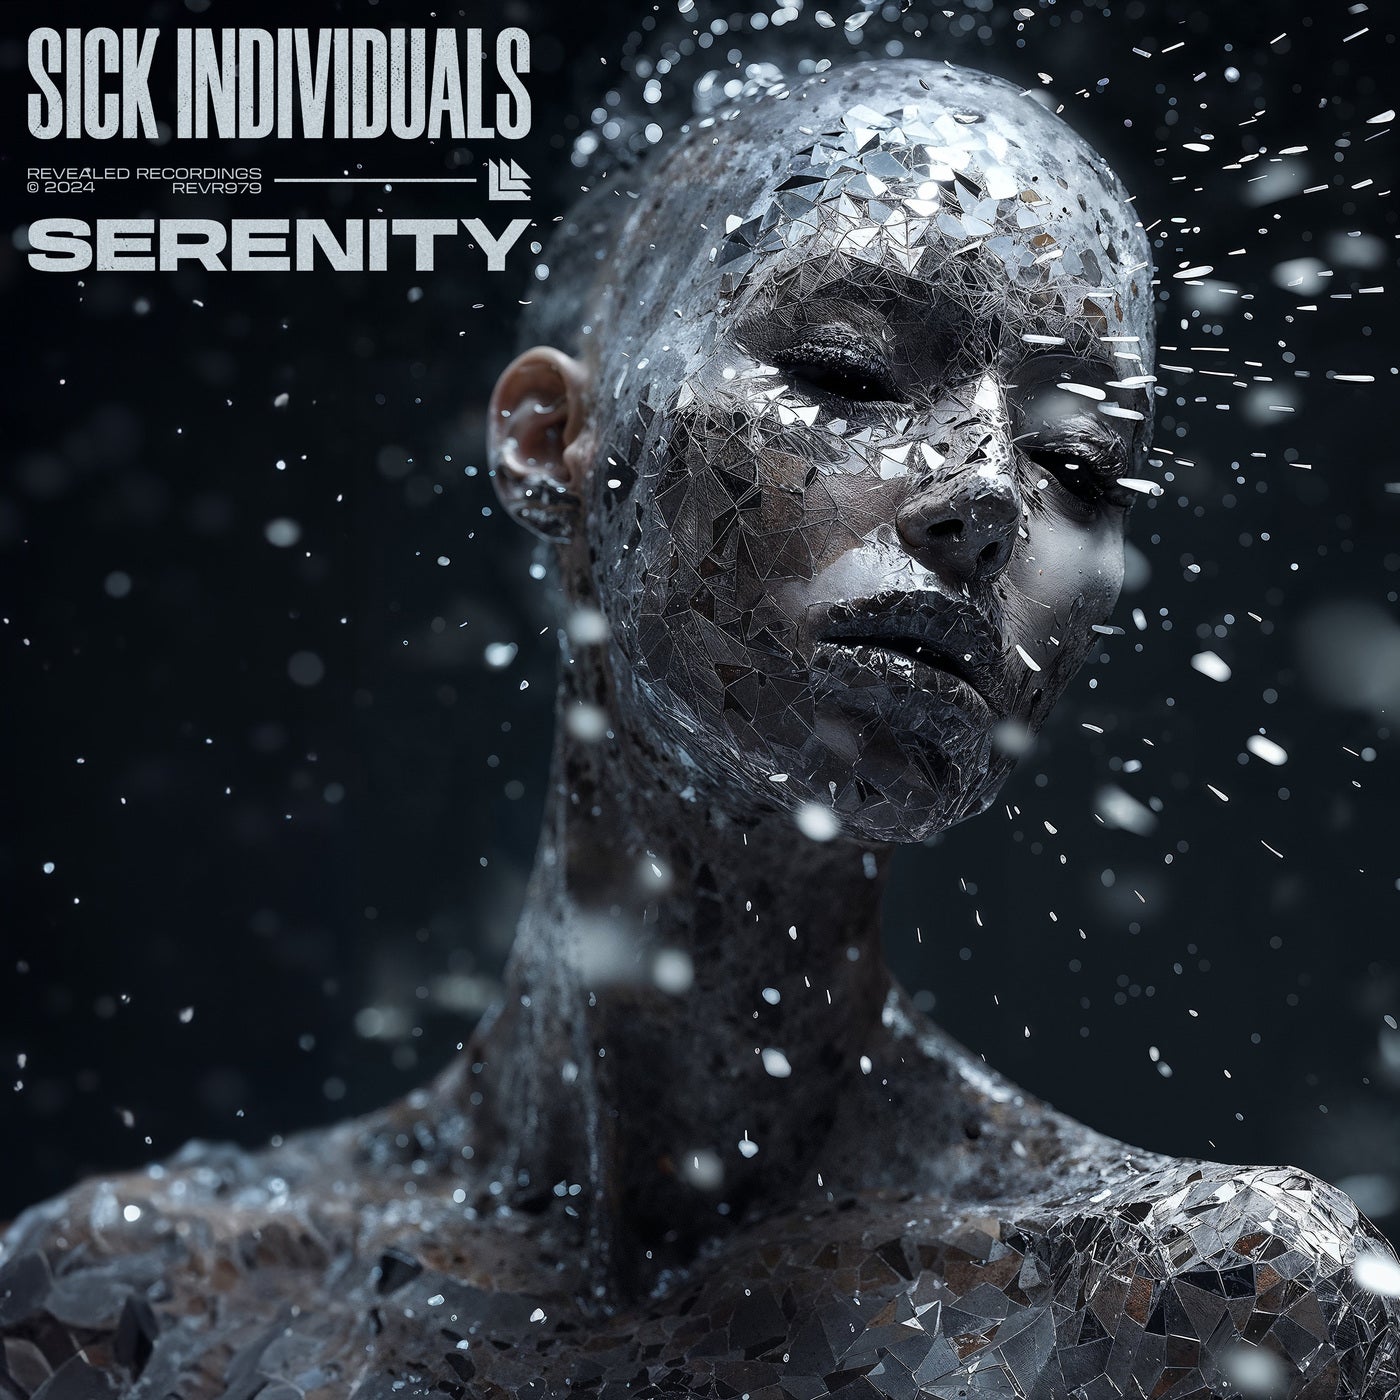 image cover: SICK INDIVIDUALS - Serenity on Revealed Recordings